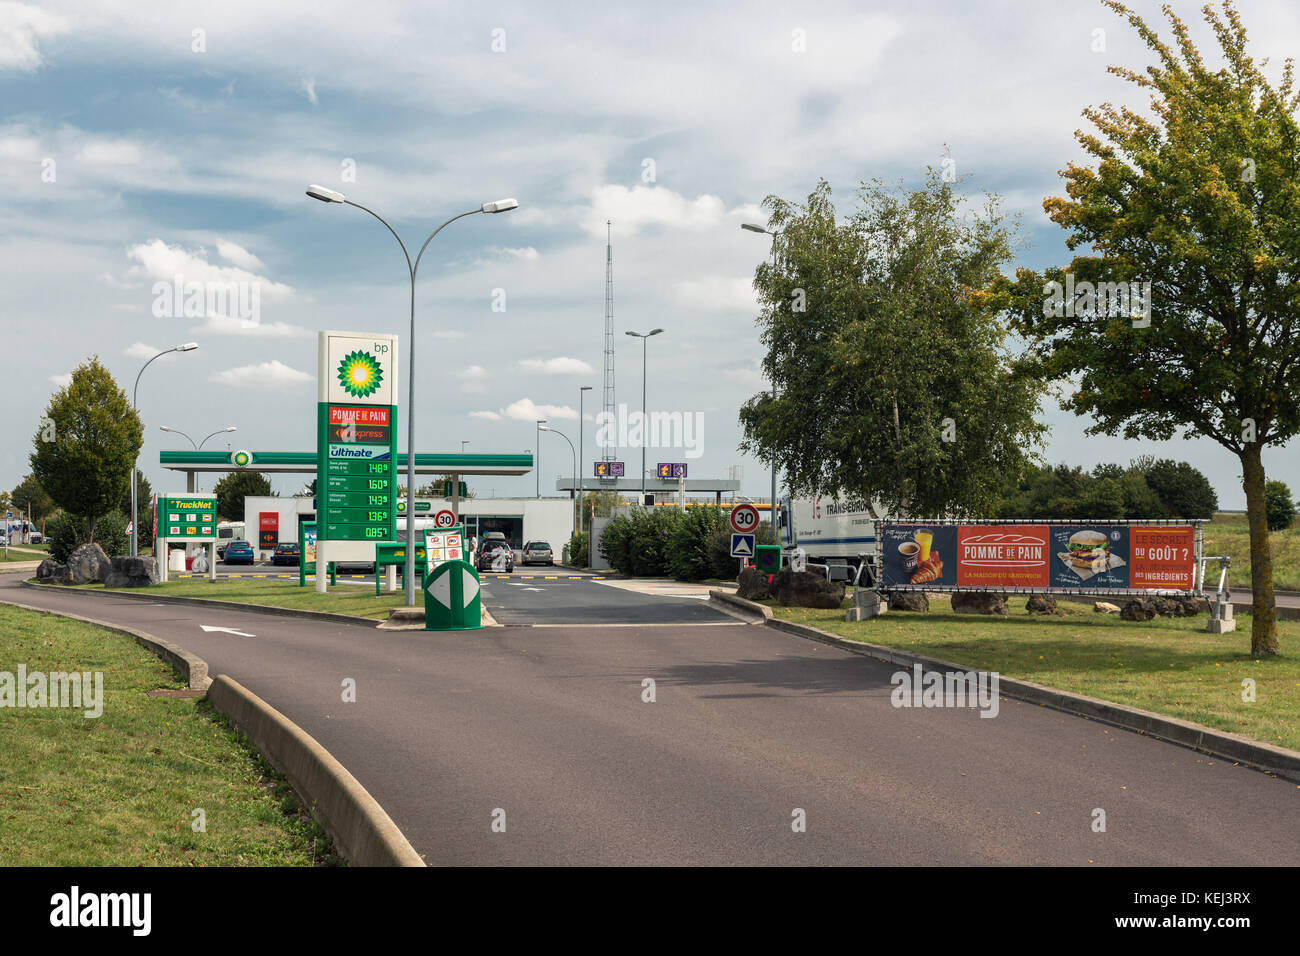 NORMANDIE, FRANCE - AUGUST 23, 2017: Gas station of the oil company British Petroleum BP on a French toll road in Normandie. A big billboard is situat Stock Photo